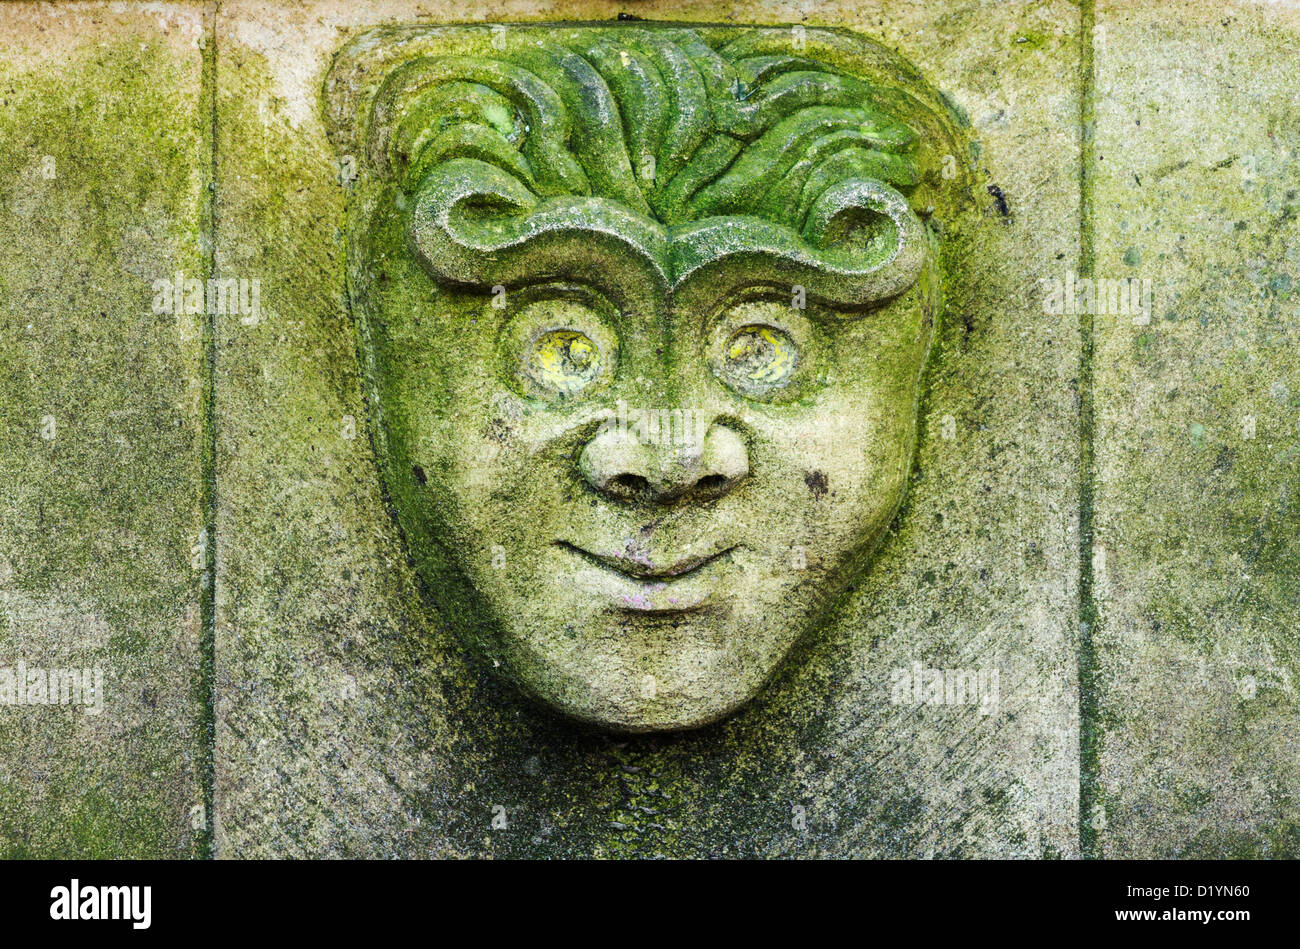 Gargoyle on bench in Dean's Park in the grounds of York Minster cathedral, York, England, United Kingdom Stock Photo